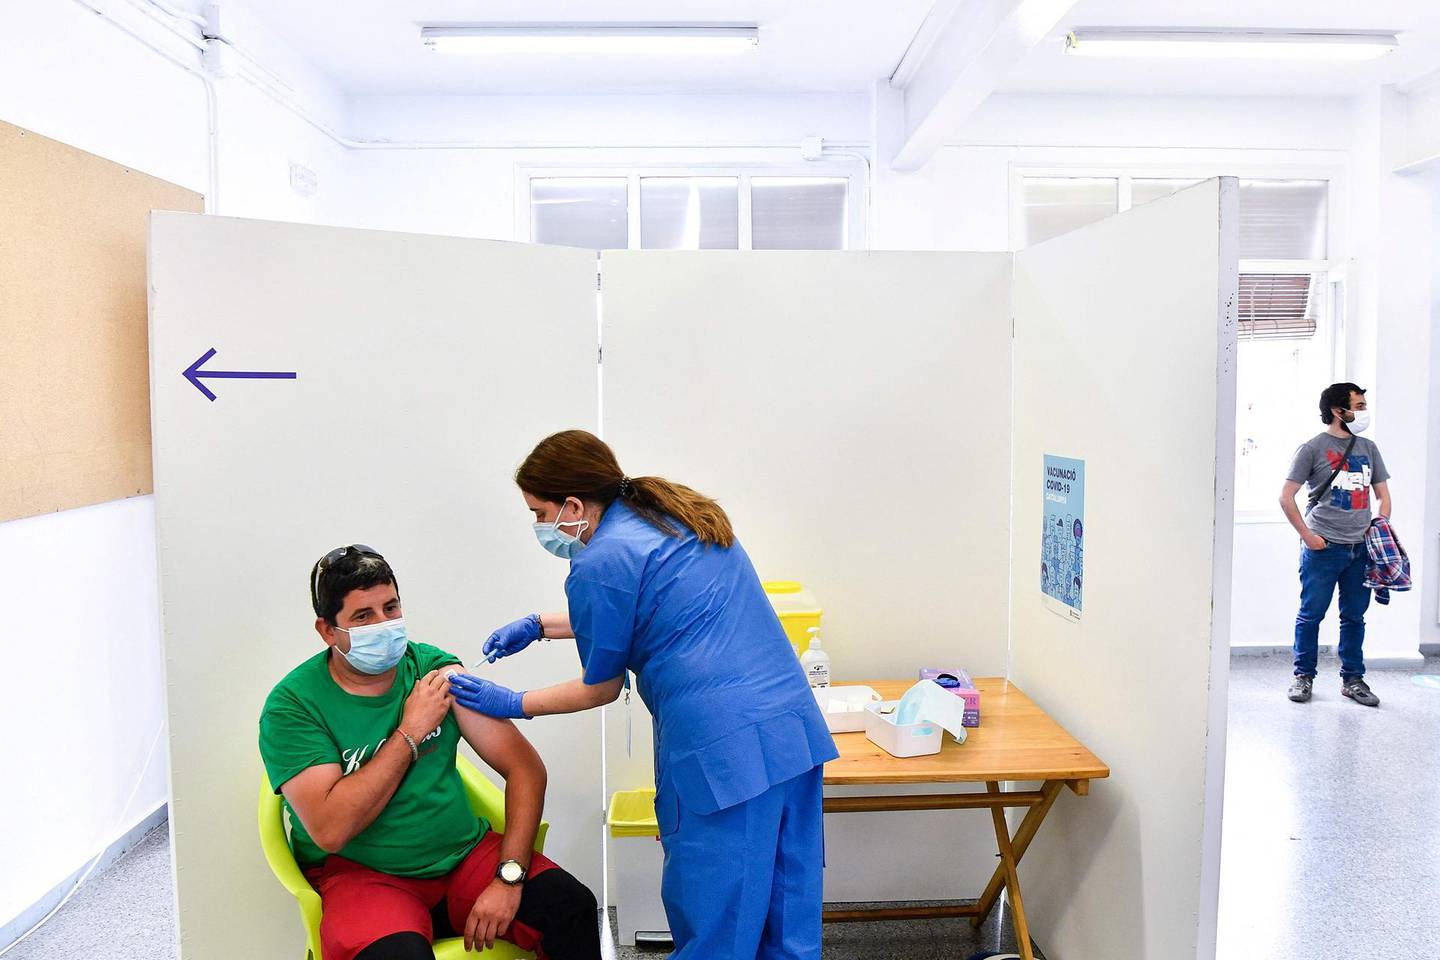 A farm worker receives an injection of the J & J / Janssen Covid-19 vaccine at a vaccination center in Alcarras, near Lleida, on May 22, 2021. / AFP / Pau BARRENA